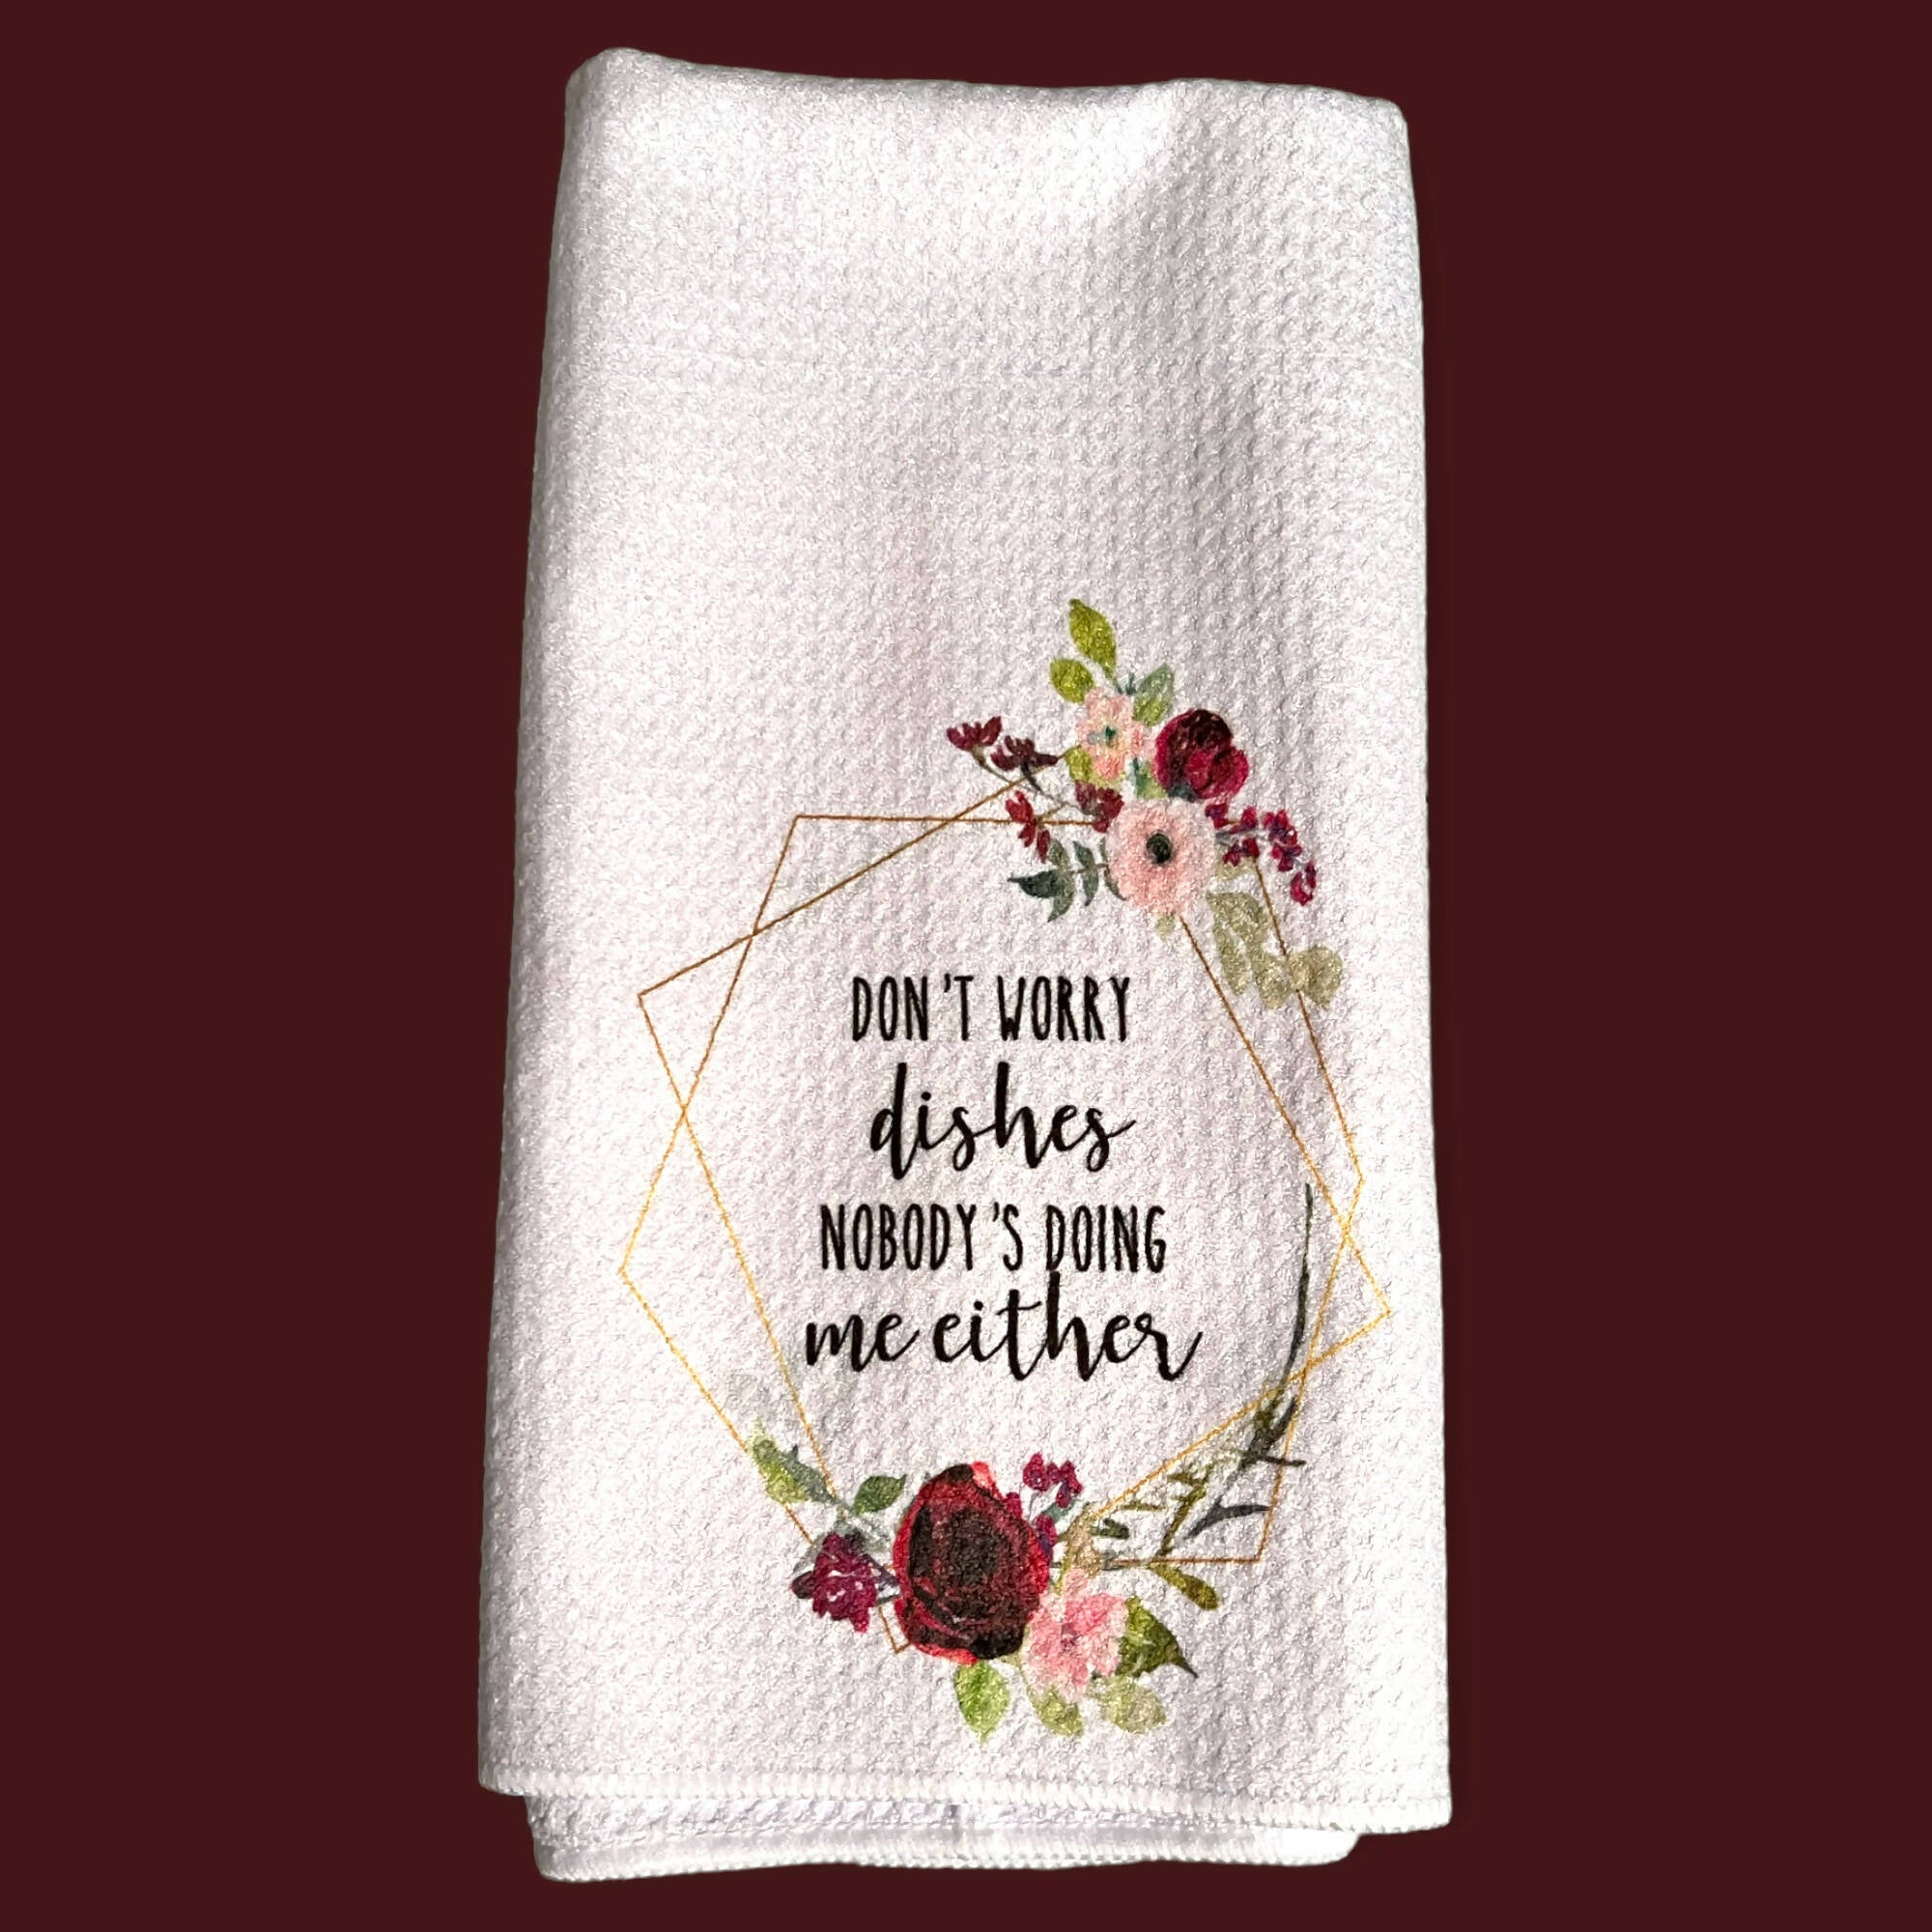 Don't worry dishes - tea towel